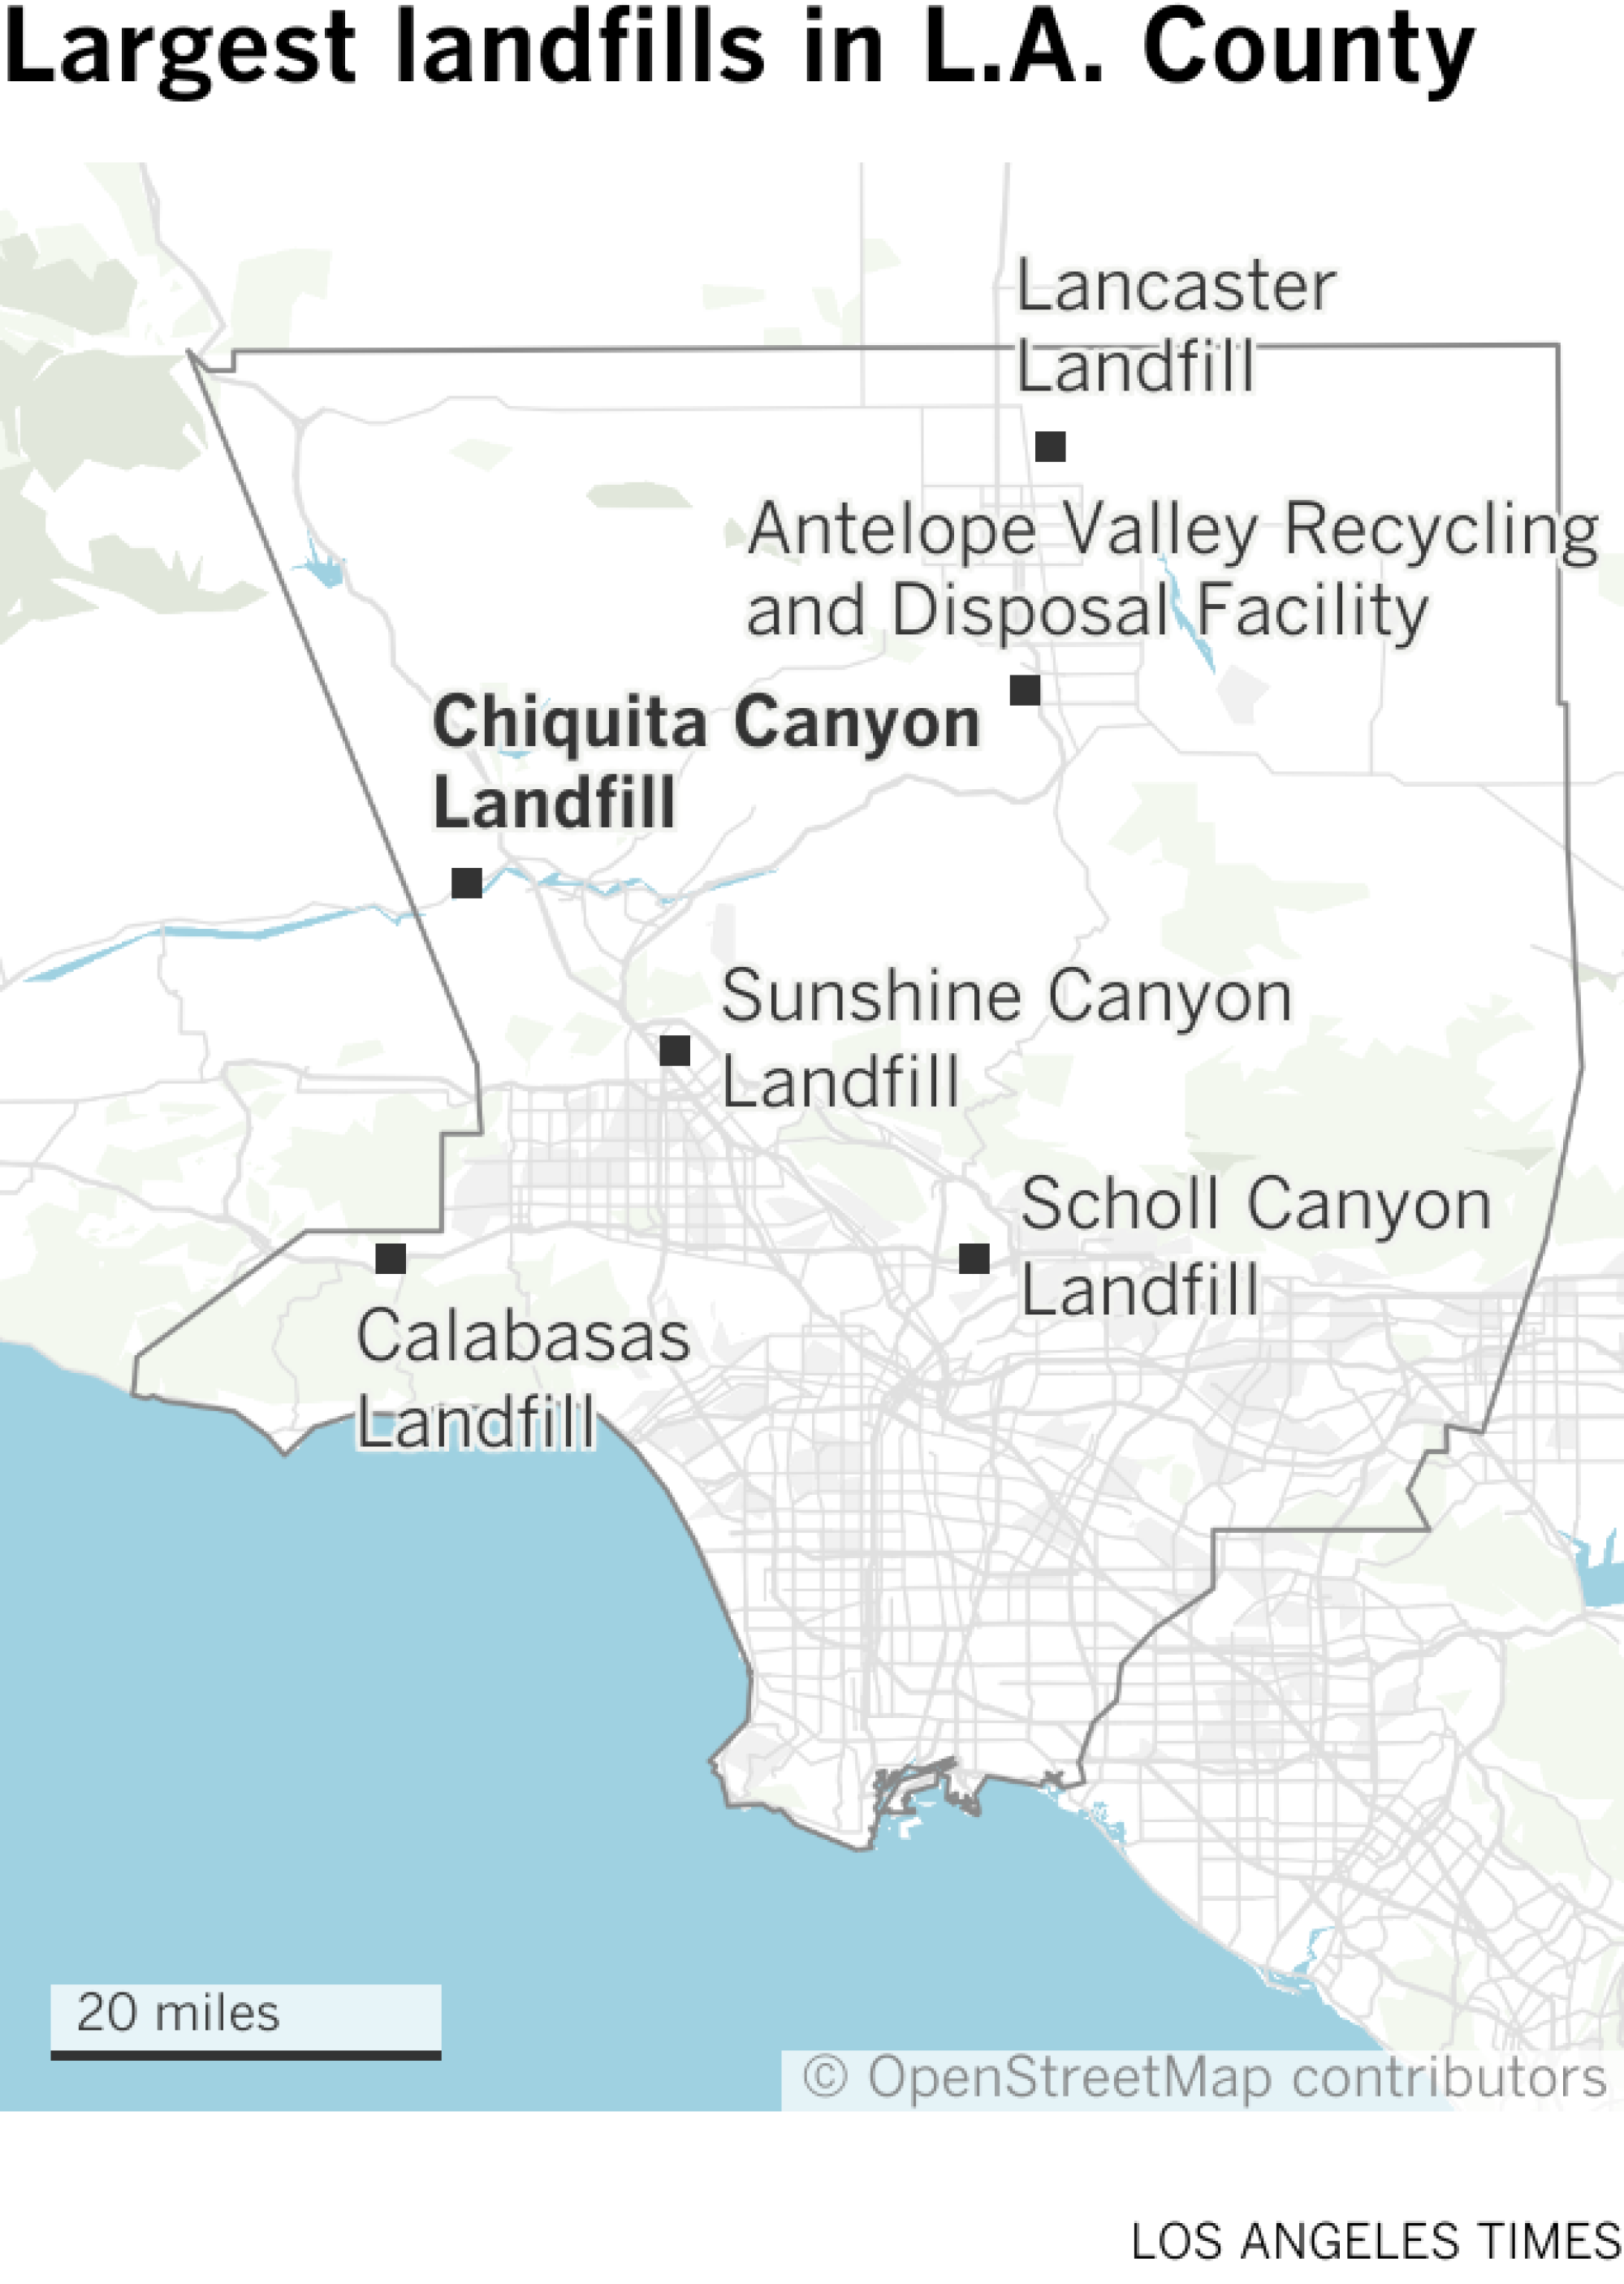 A map shows the locations of the six largest landfills in L.A. County. They are: Chiquita Canyon and Sunshine Canyon near Santa Clarita; School Canyon near Pasadena; the Calabasas Landfill; the Lancaster Landfill; and the Antelope Valley Recycling and Disposal Facility.